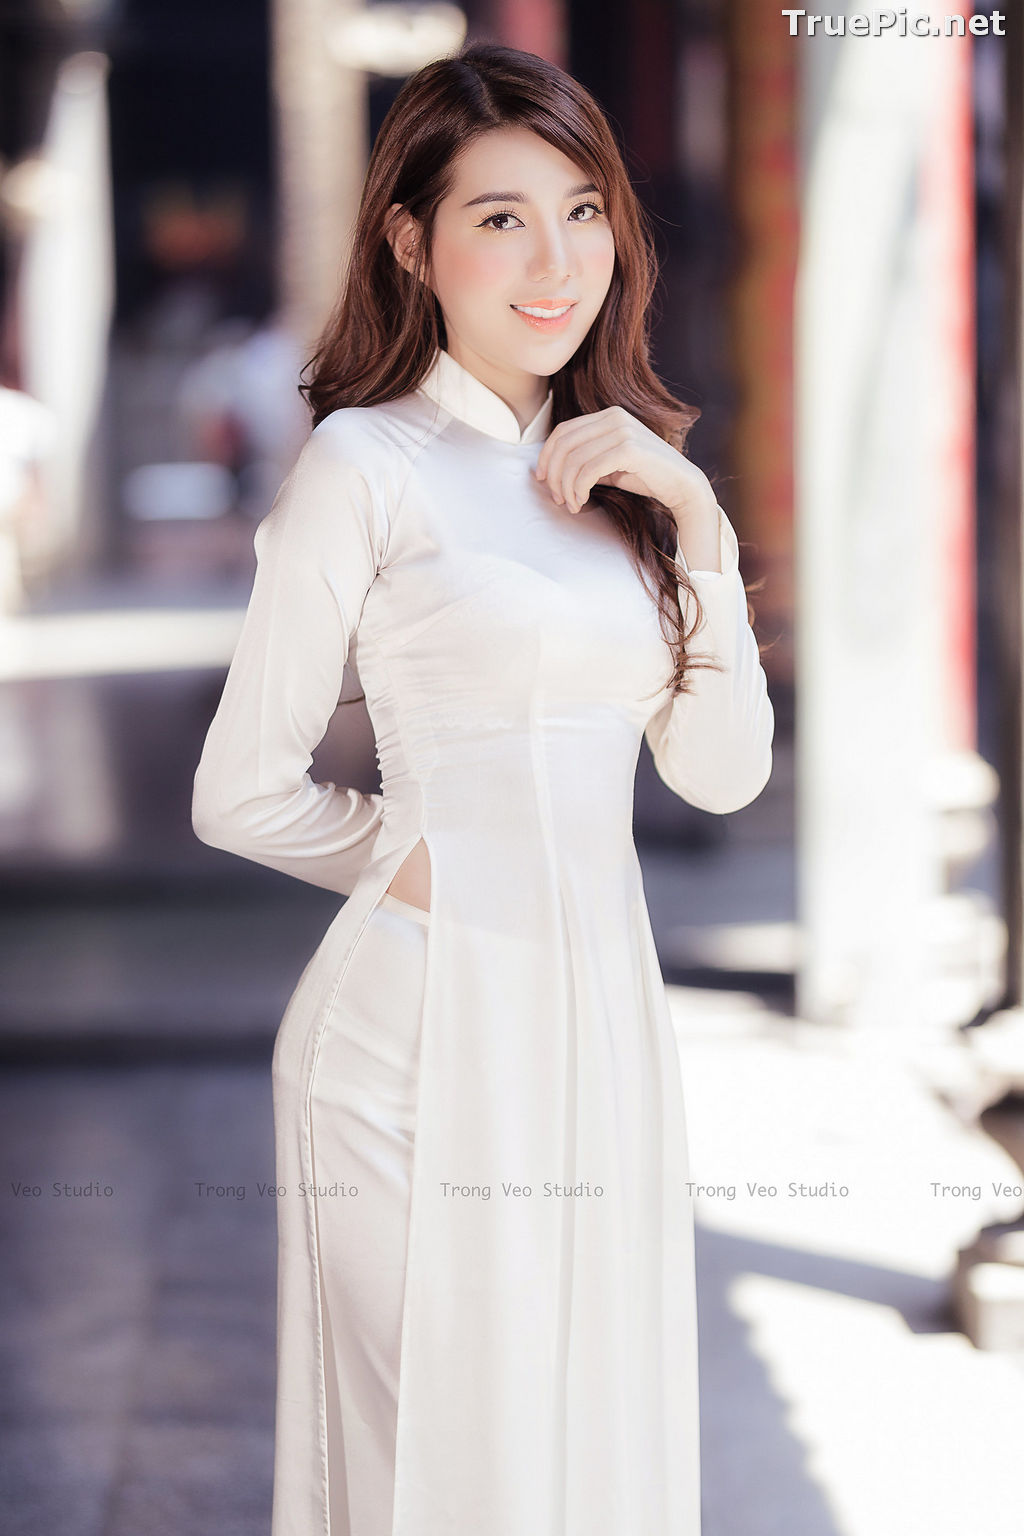 Image The Beauty of Vietnamese Girls with Traditional Dress (Ao Dai) #3 - TruePic.net - Picture-77